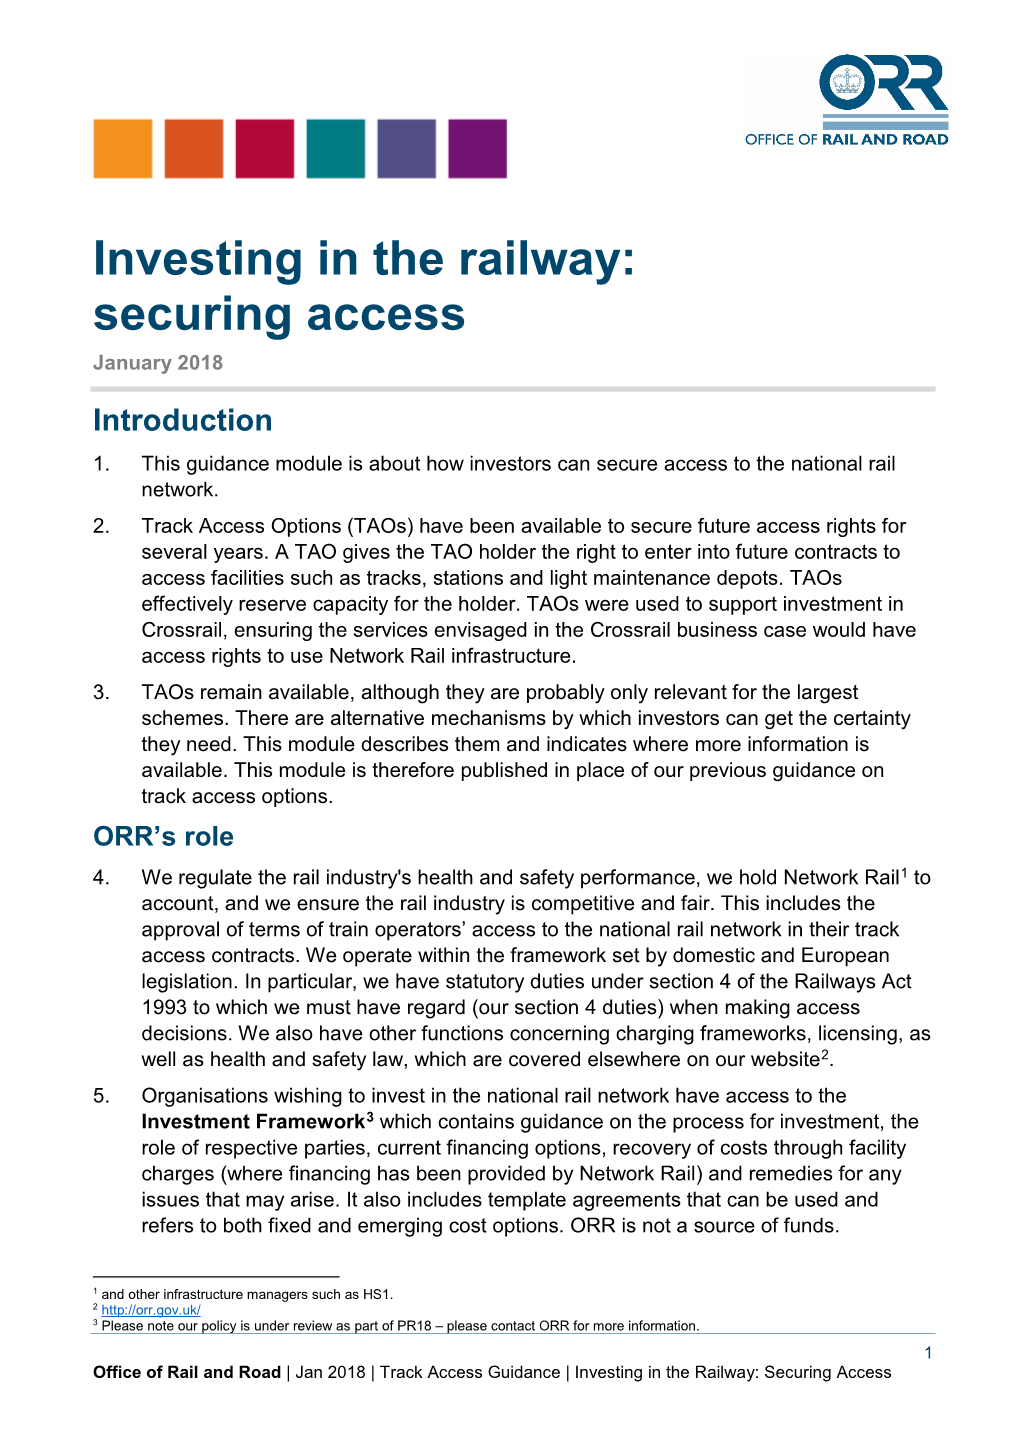 Investing in the Railway: Securing Access January 2018